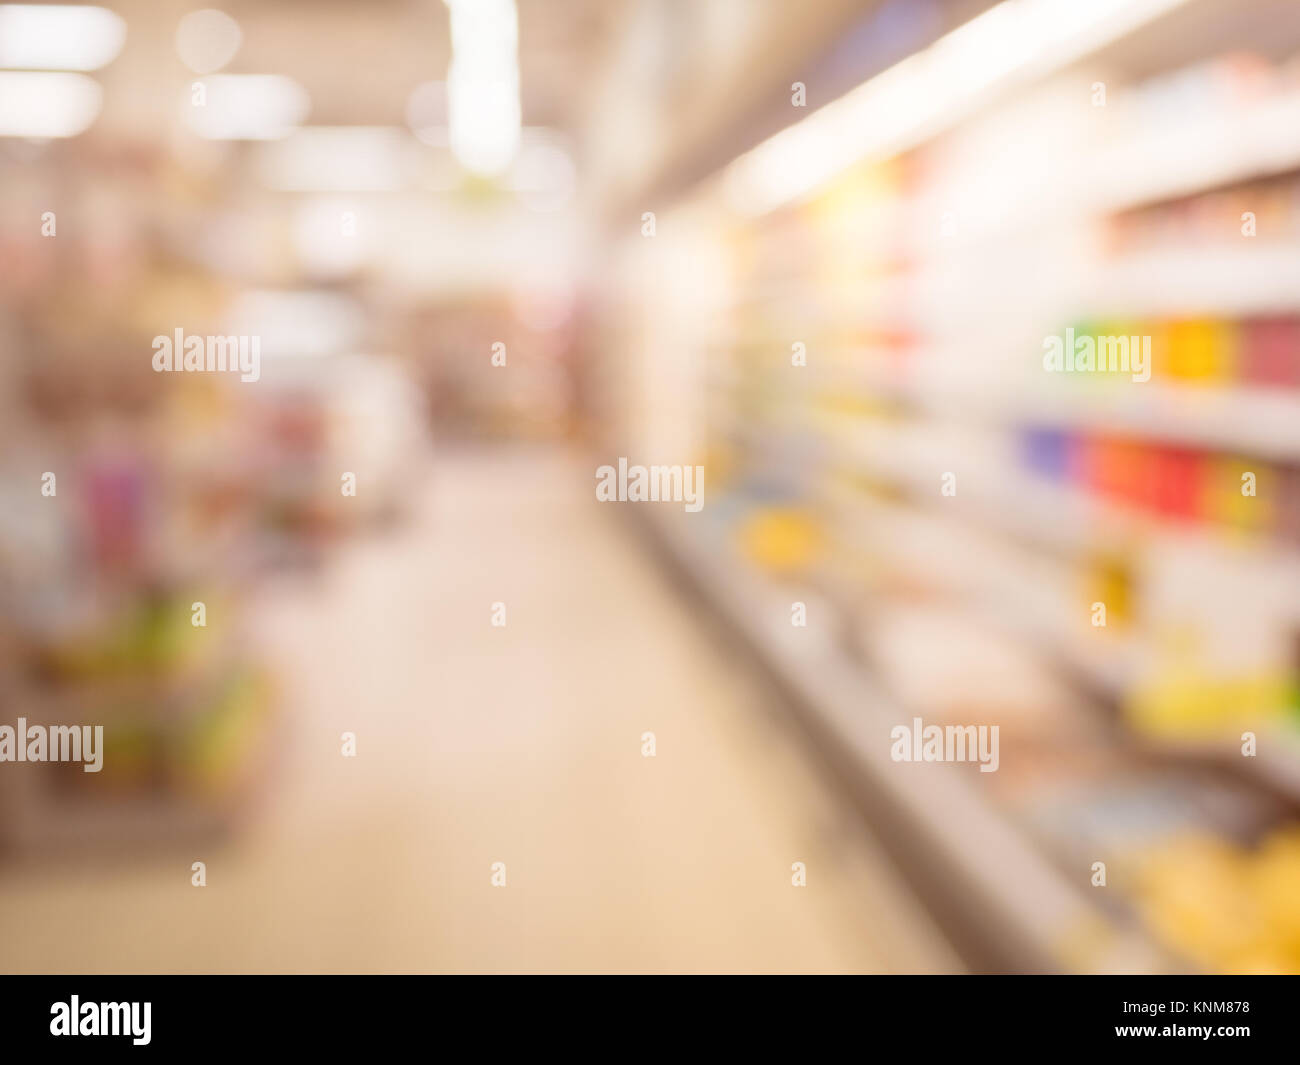 Blurred supermarket pass with colorful shelves as background. Stock Photo